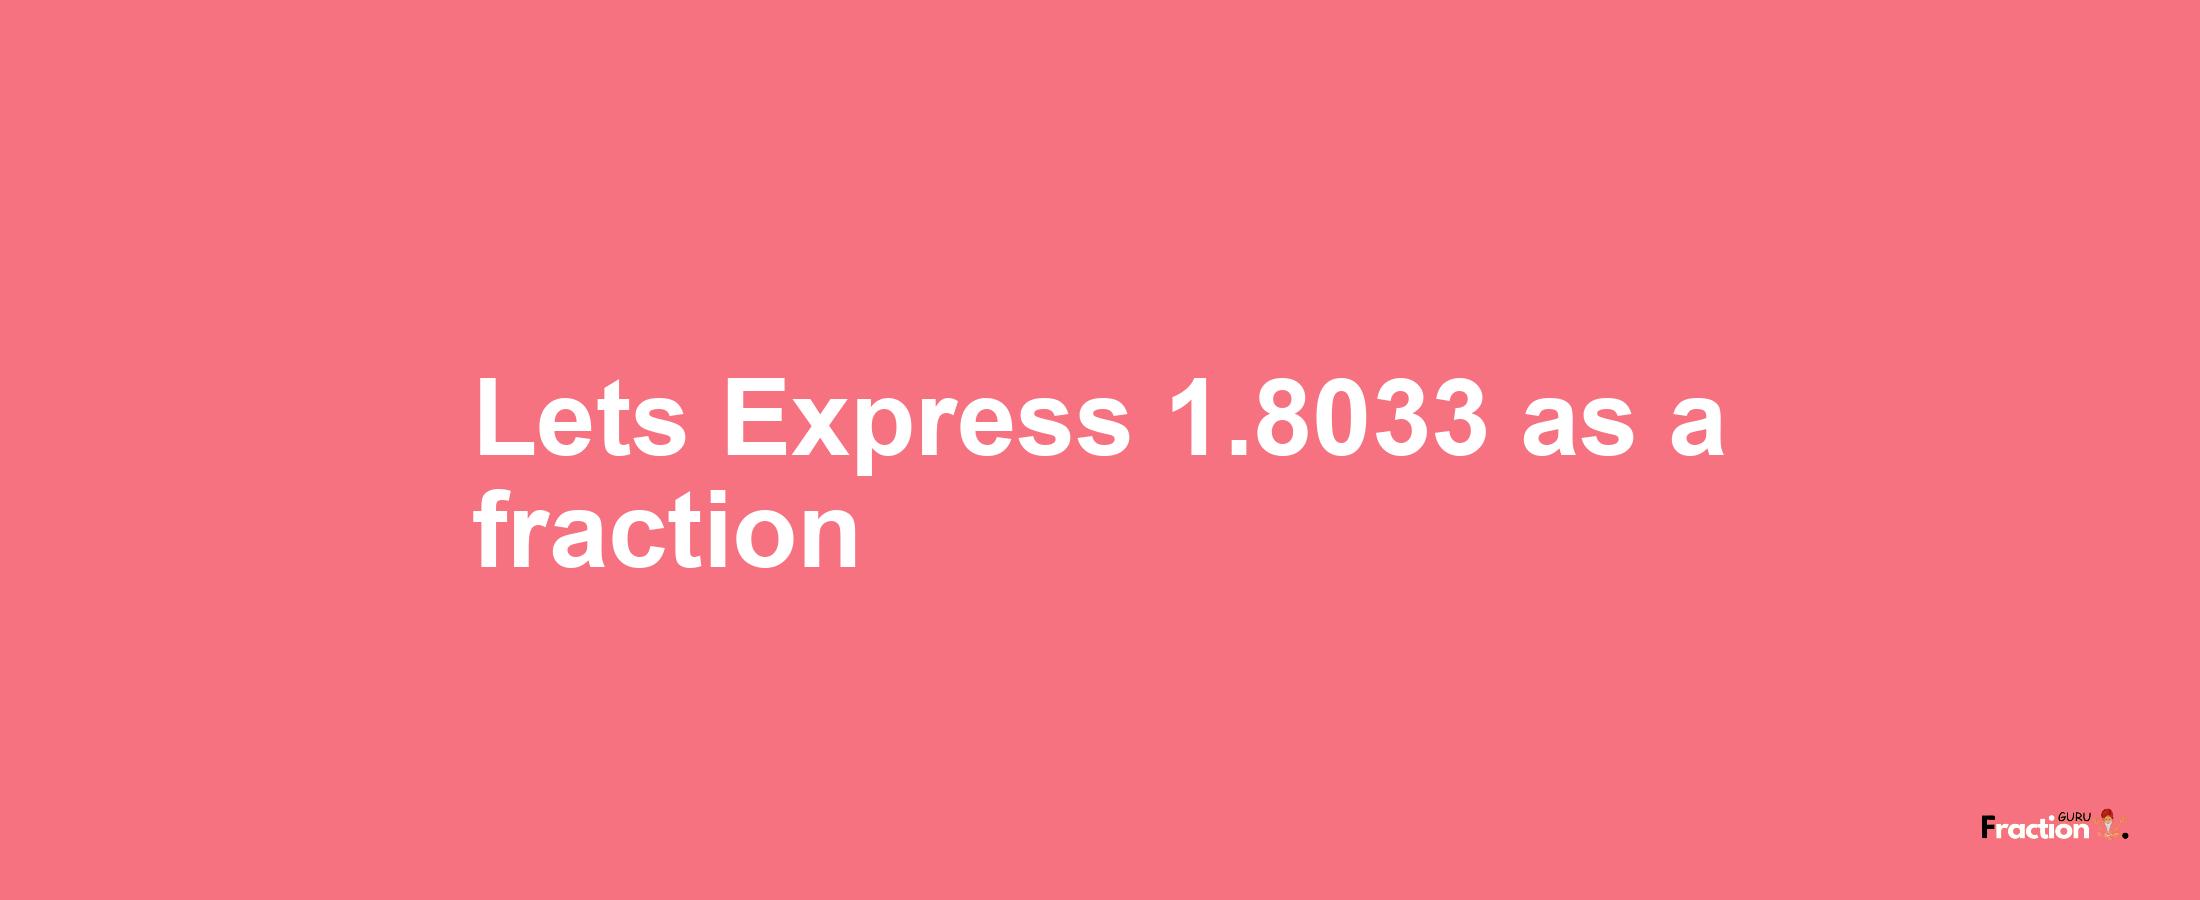 Lets Express 1.8033 as afraction